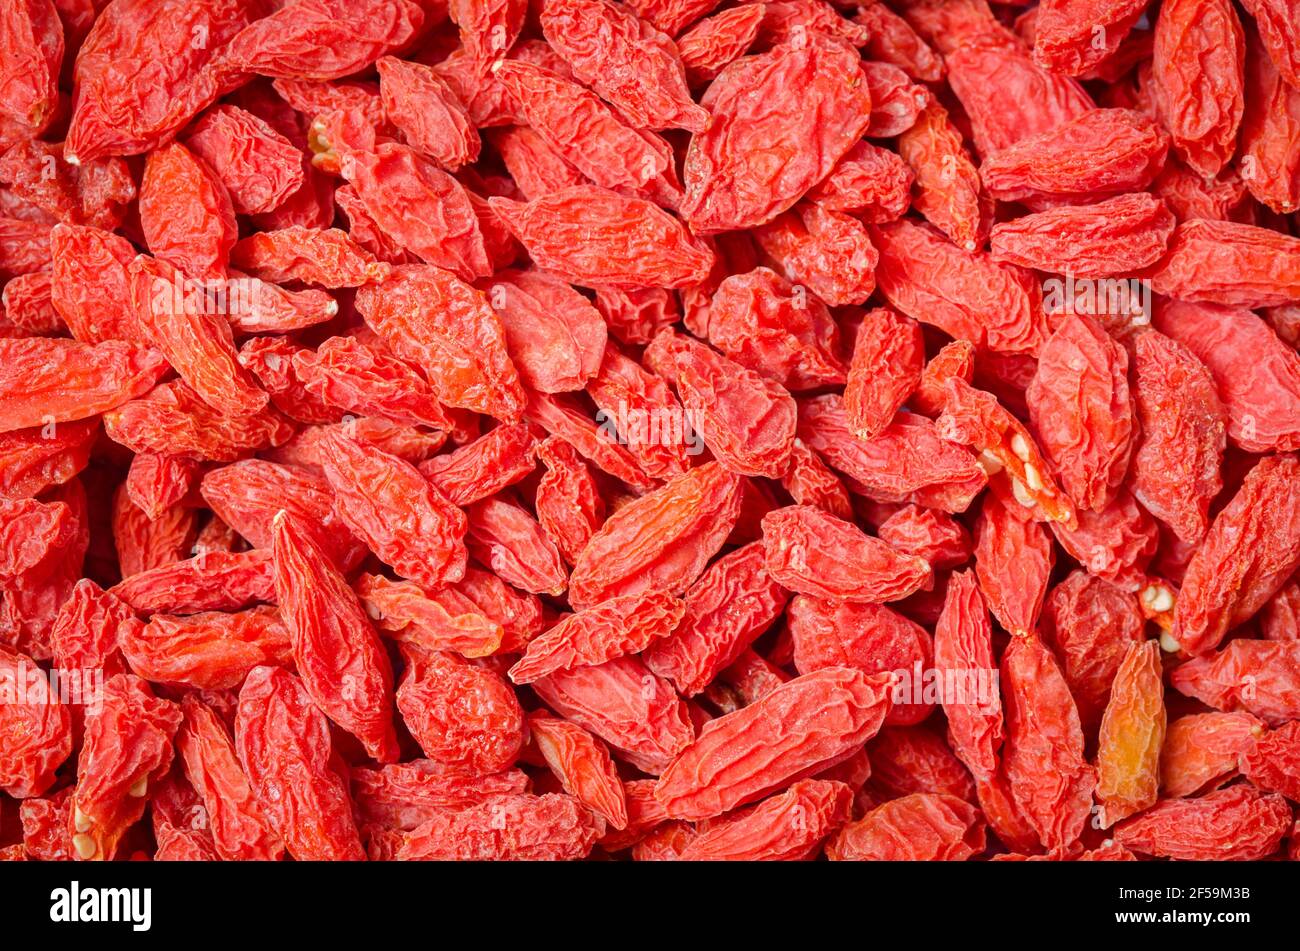 Background of dried Chinese wolfberries or goji berries. Stock Photo